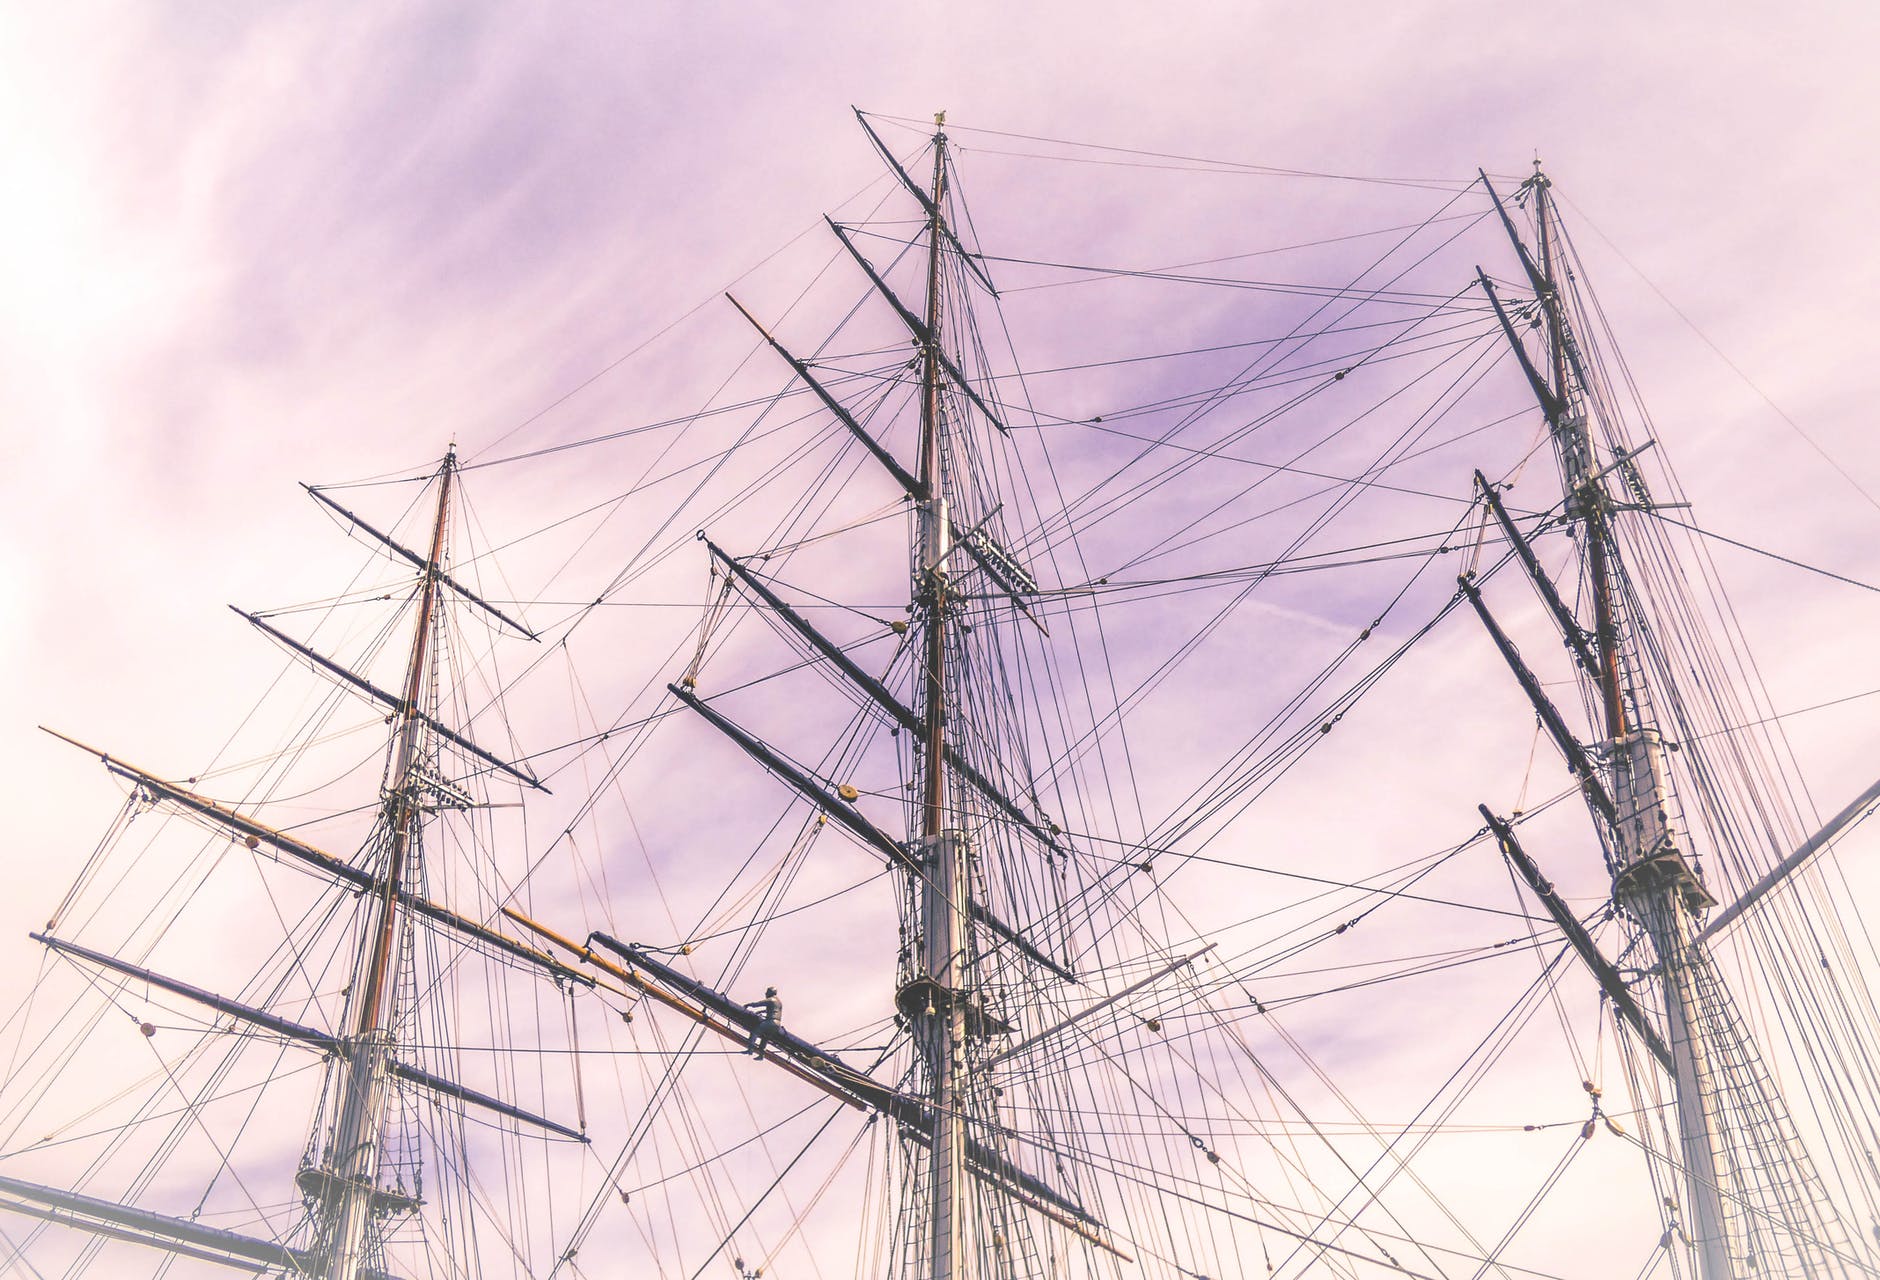 galleon ship photo under the cloudy sky